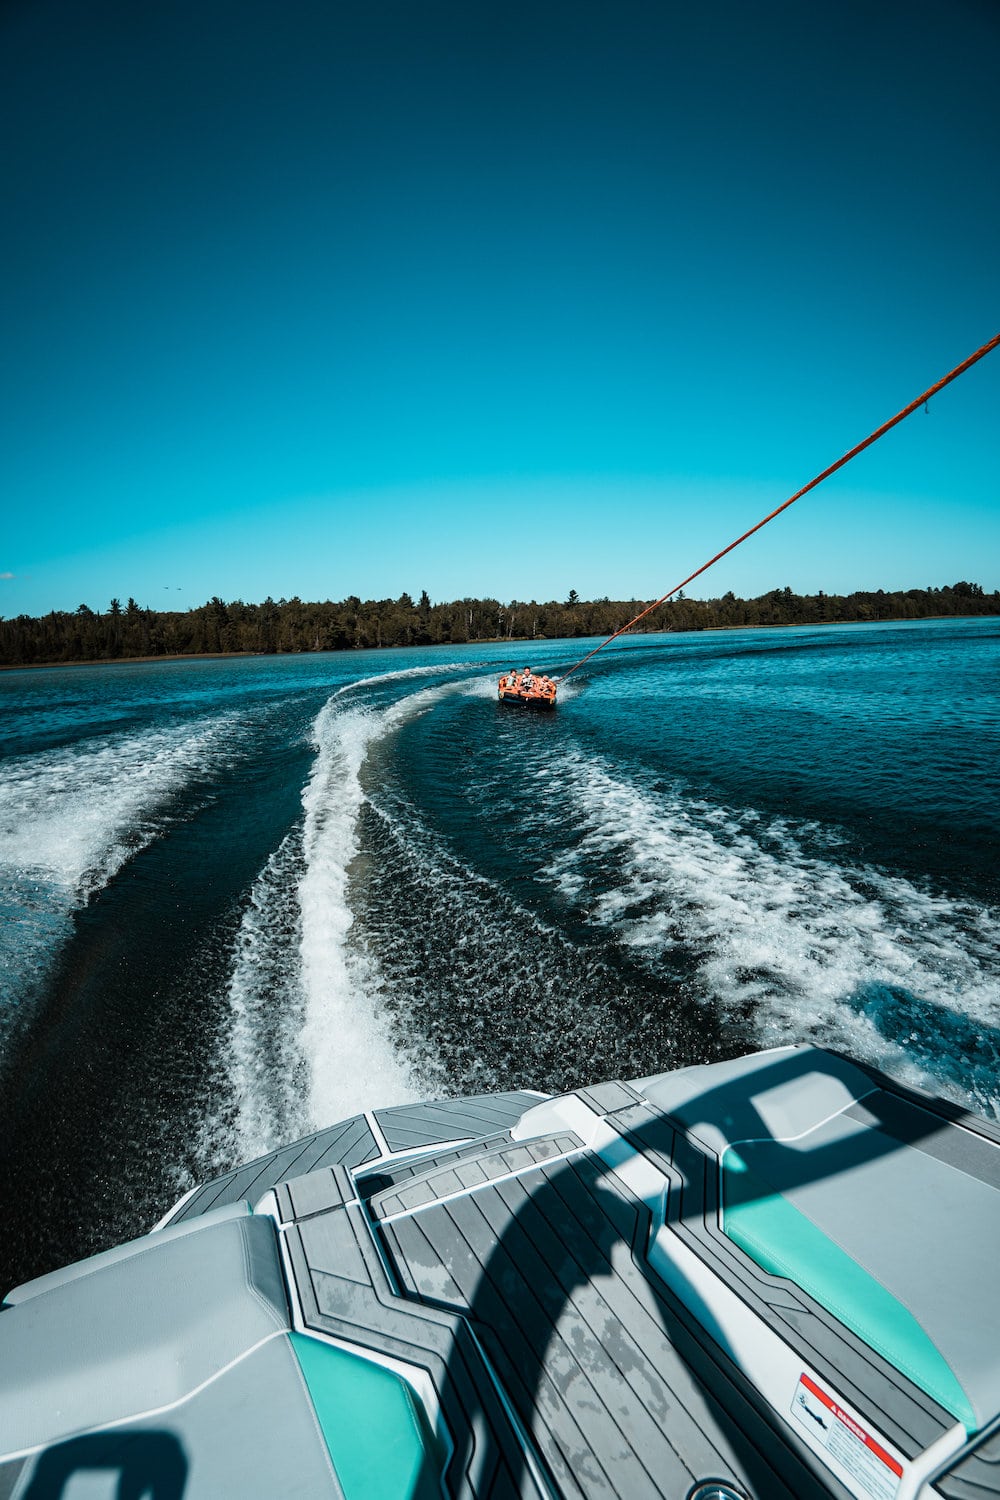 Photograph of the back of a boat, pulling people on a tube, on a lake. Edited, color and contrast are increased with an emphasis on orange and teal.